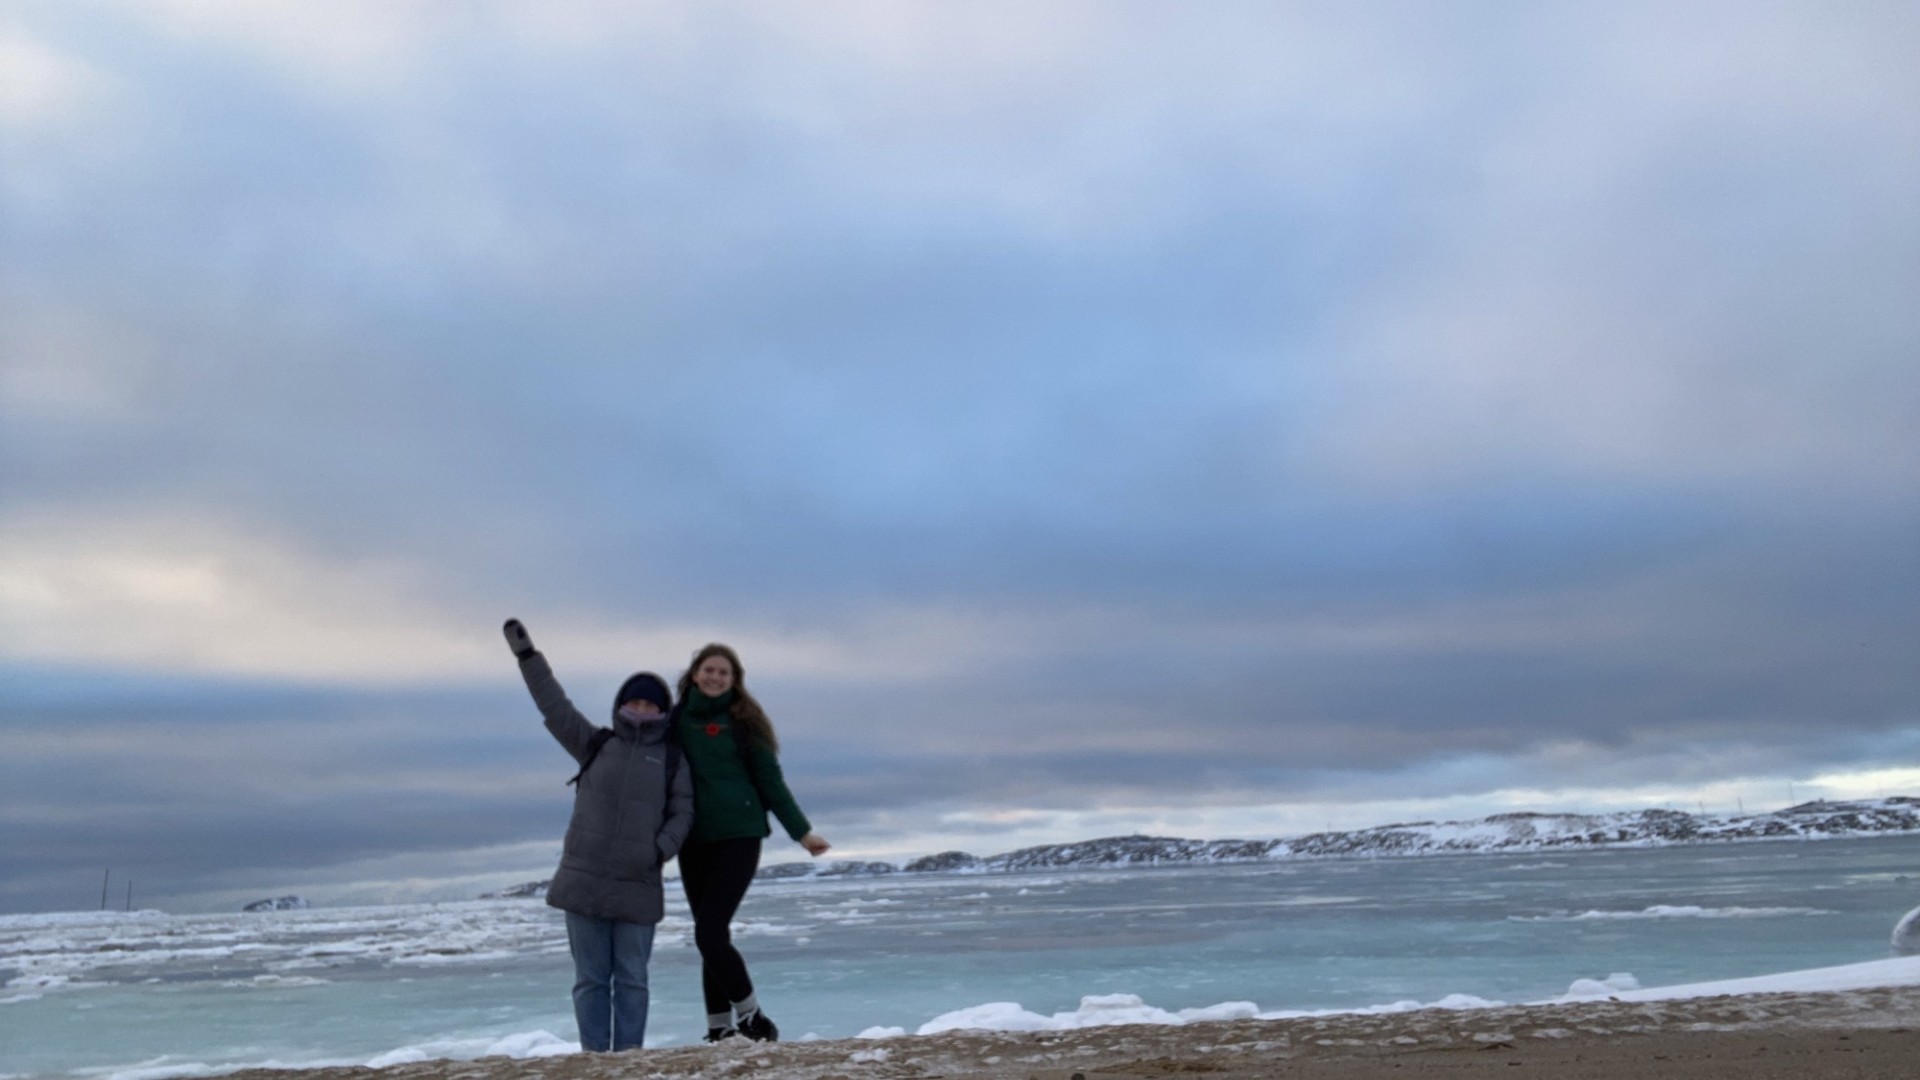 Two people in jackets standing on a beach waving